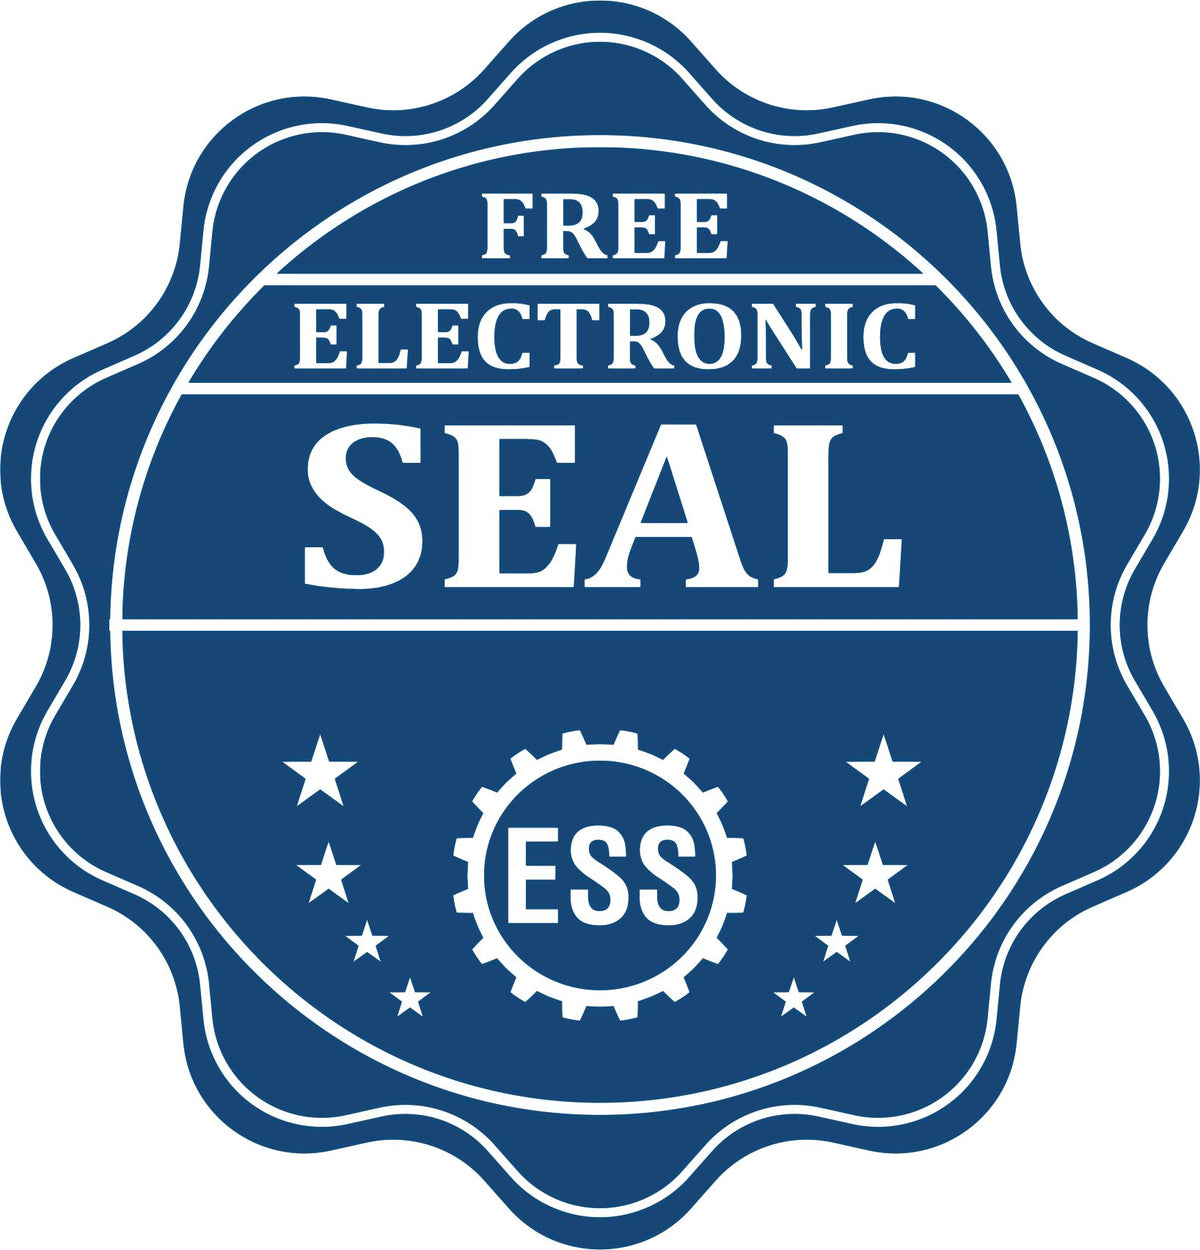 A badge showing a free electronic seal for the Gift Pennsylvania Geologist Seal with stars and the ESS gear on the emblem.